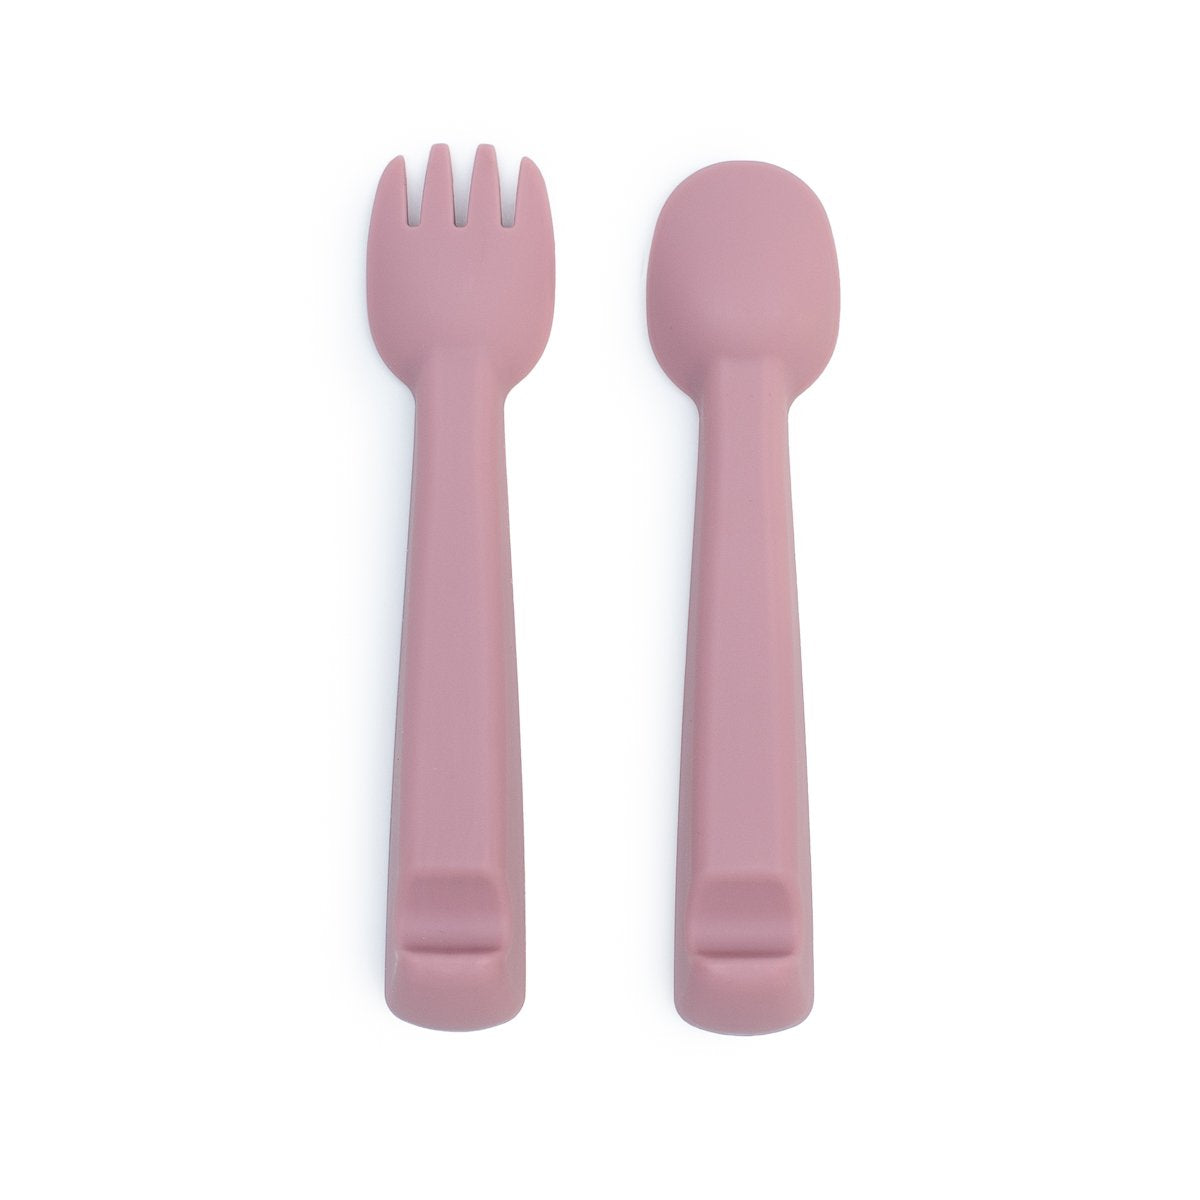 Feedie Fork & Spoon Set with Case - Dusty Rose - Little Reef and Friends